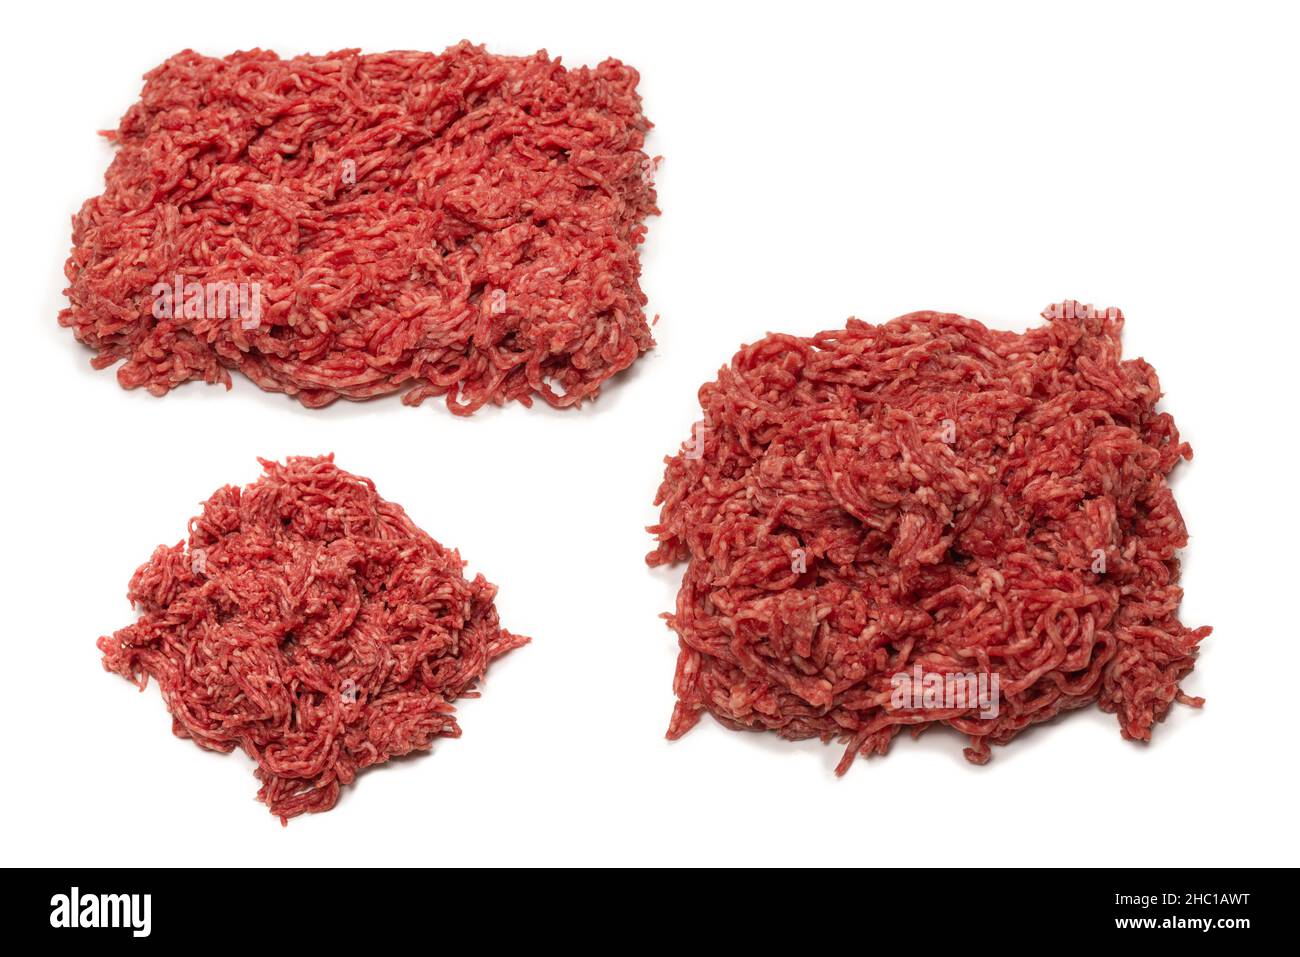 Minced meat seamless pattern Stock Photo by ©voronin-76 2577827